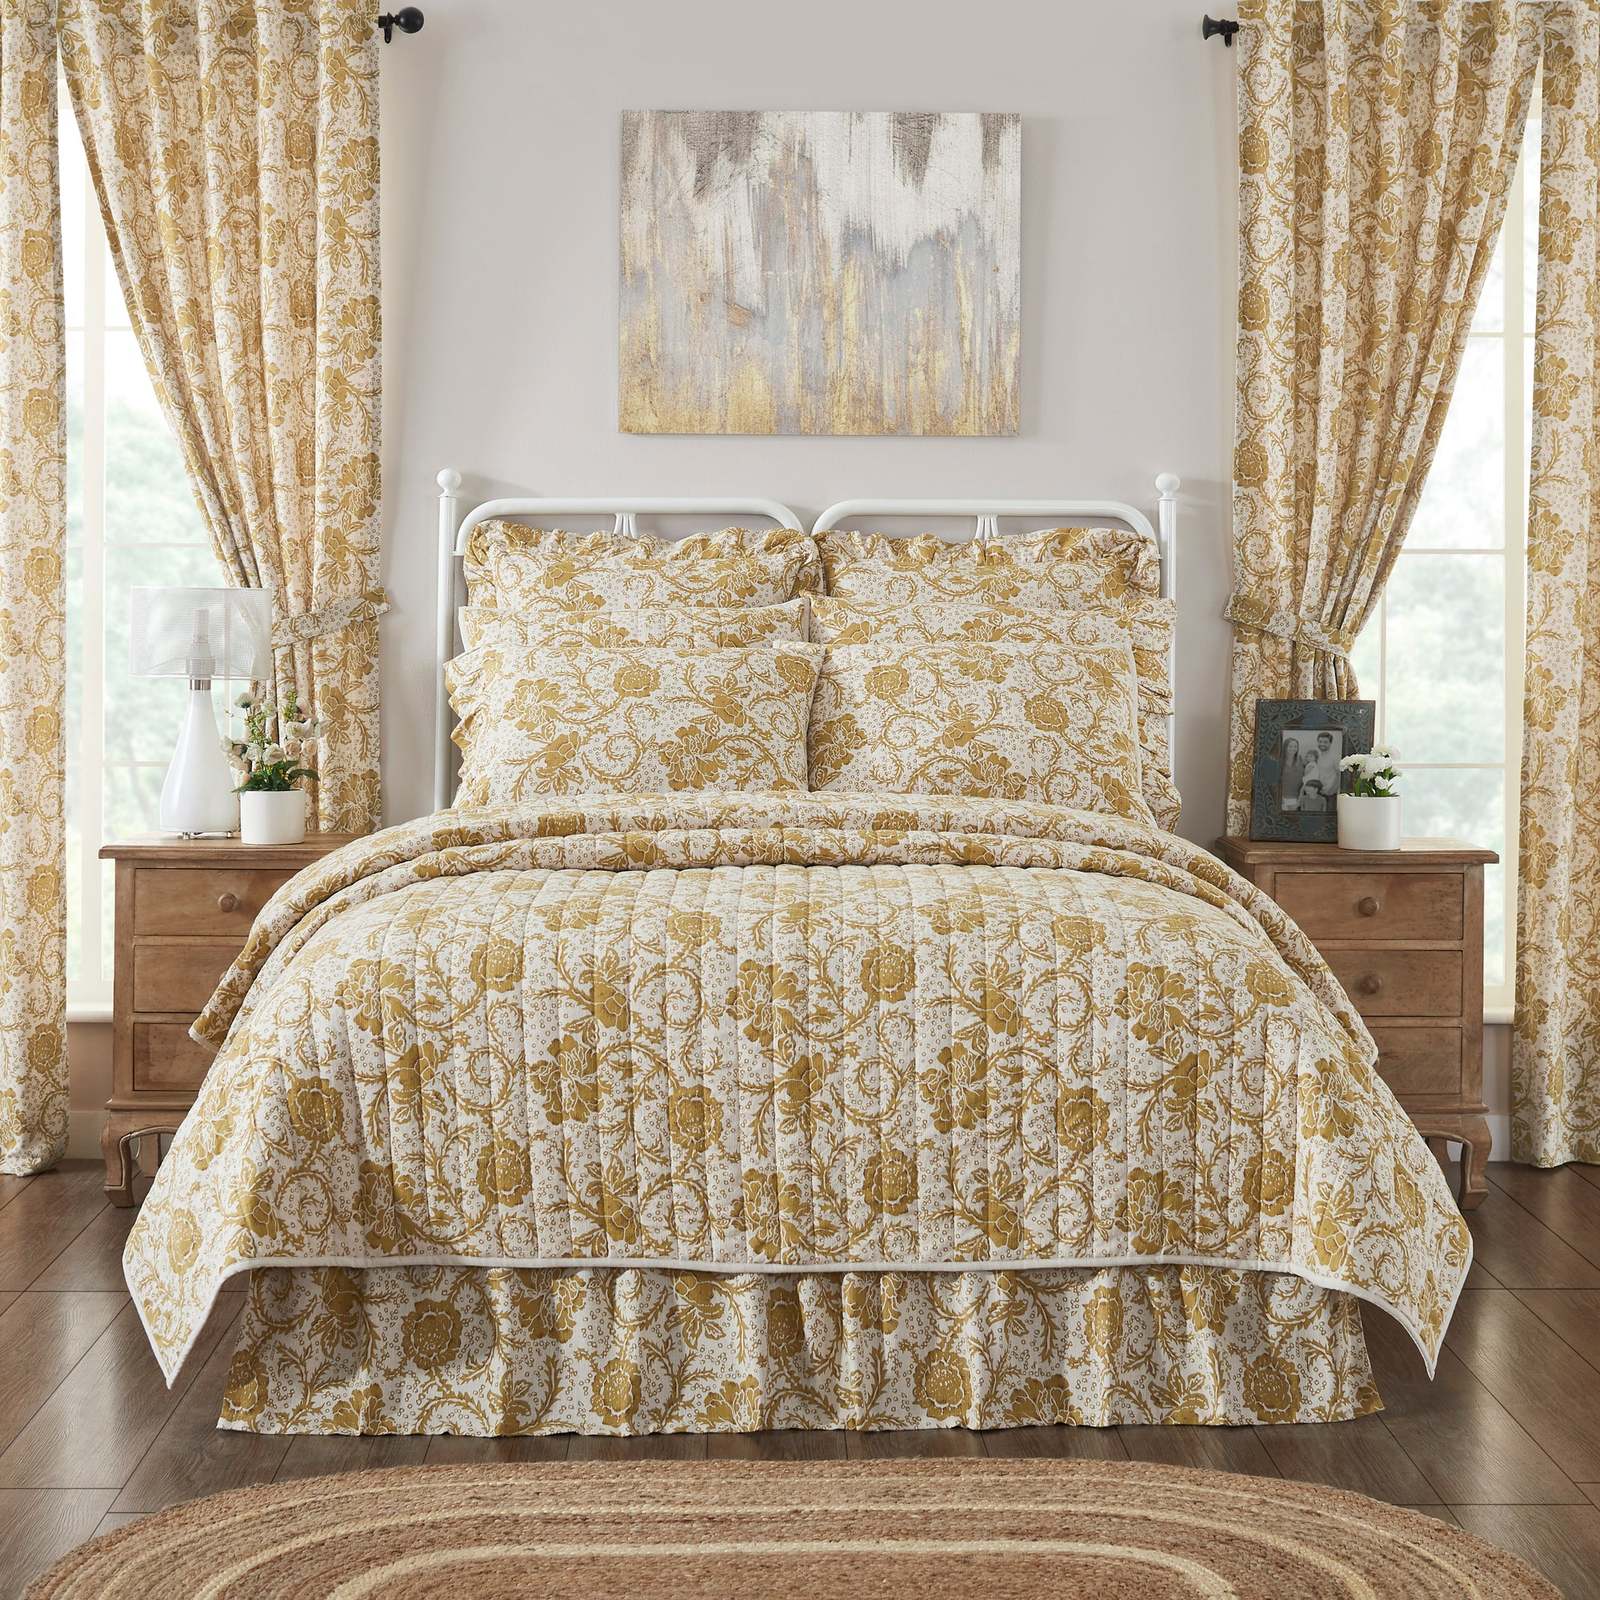 Dorset Gold Floral Luxury King Queen Twin Quilt